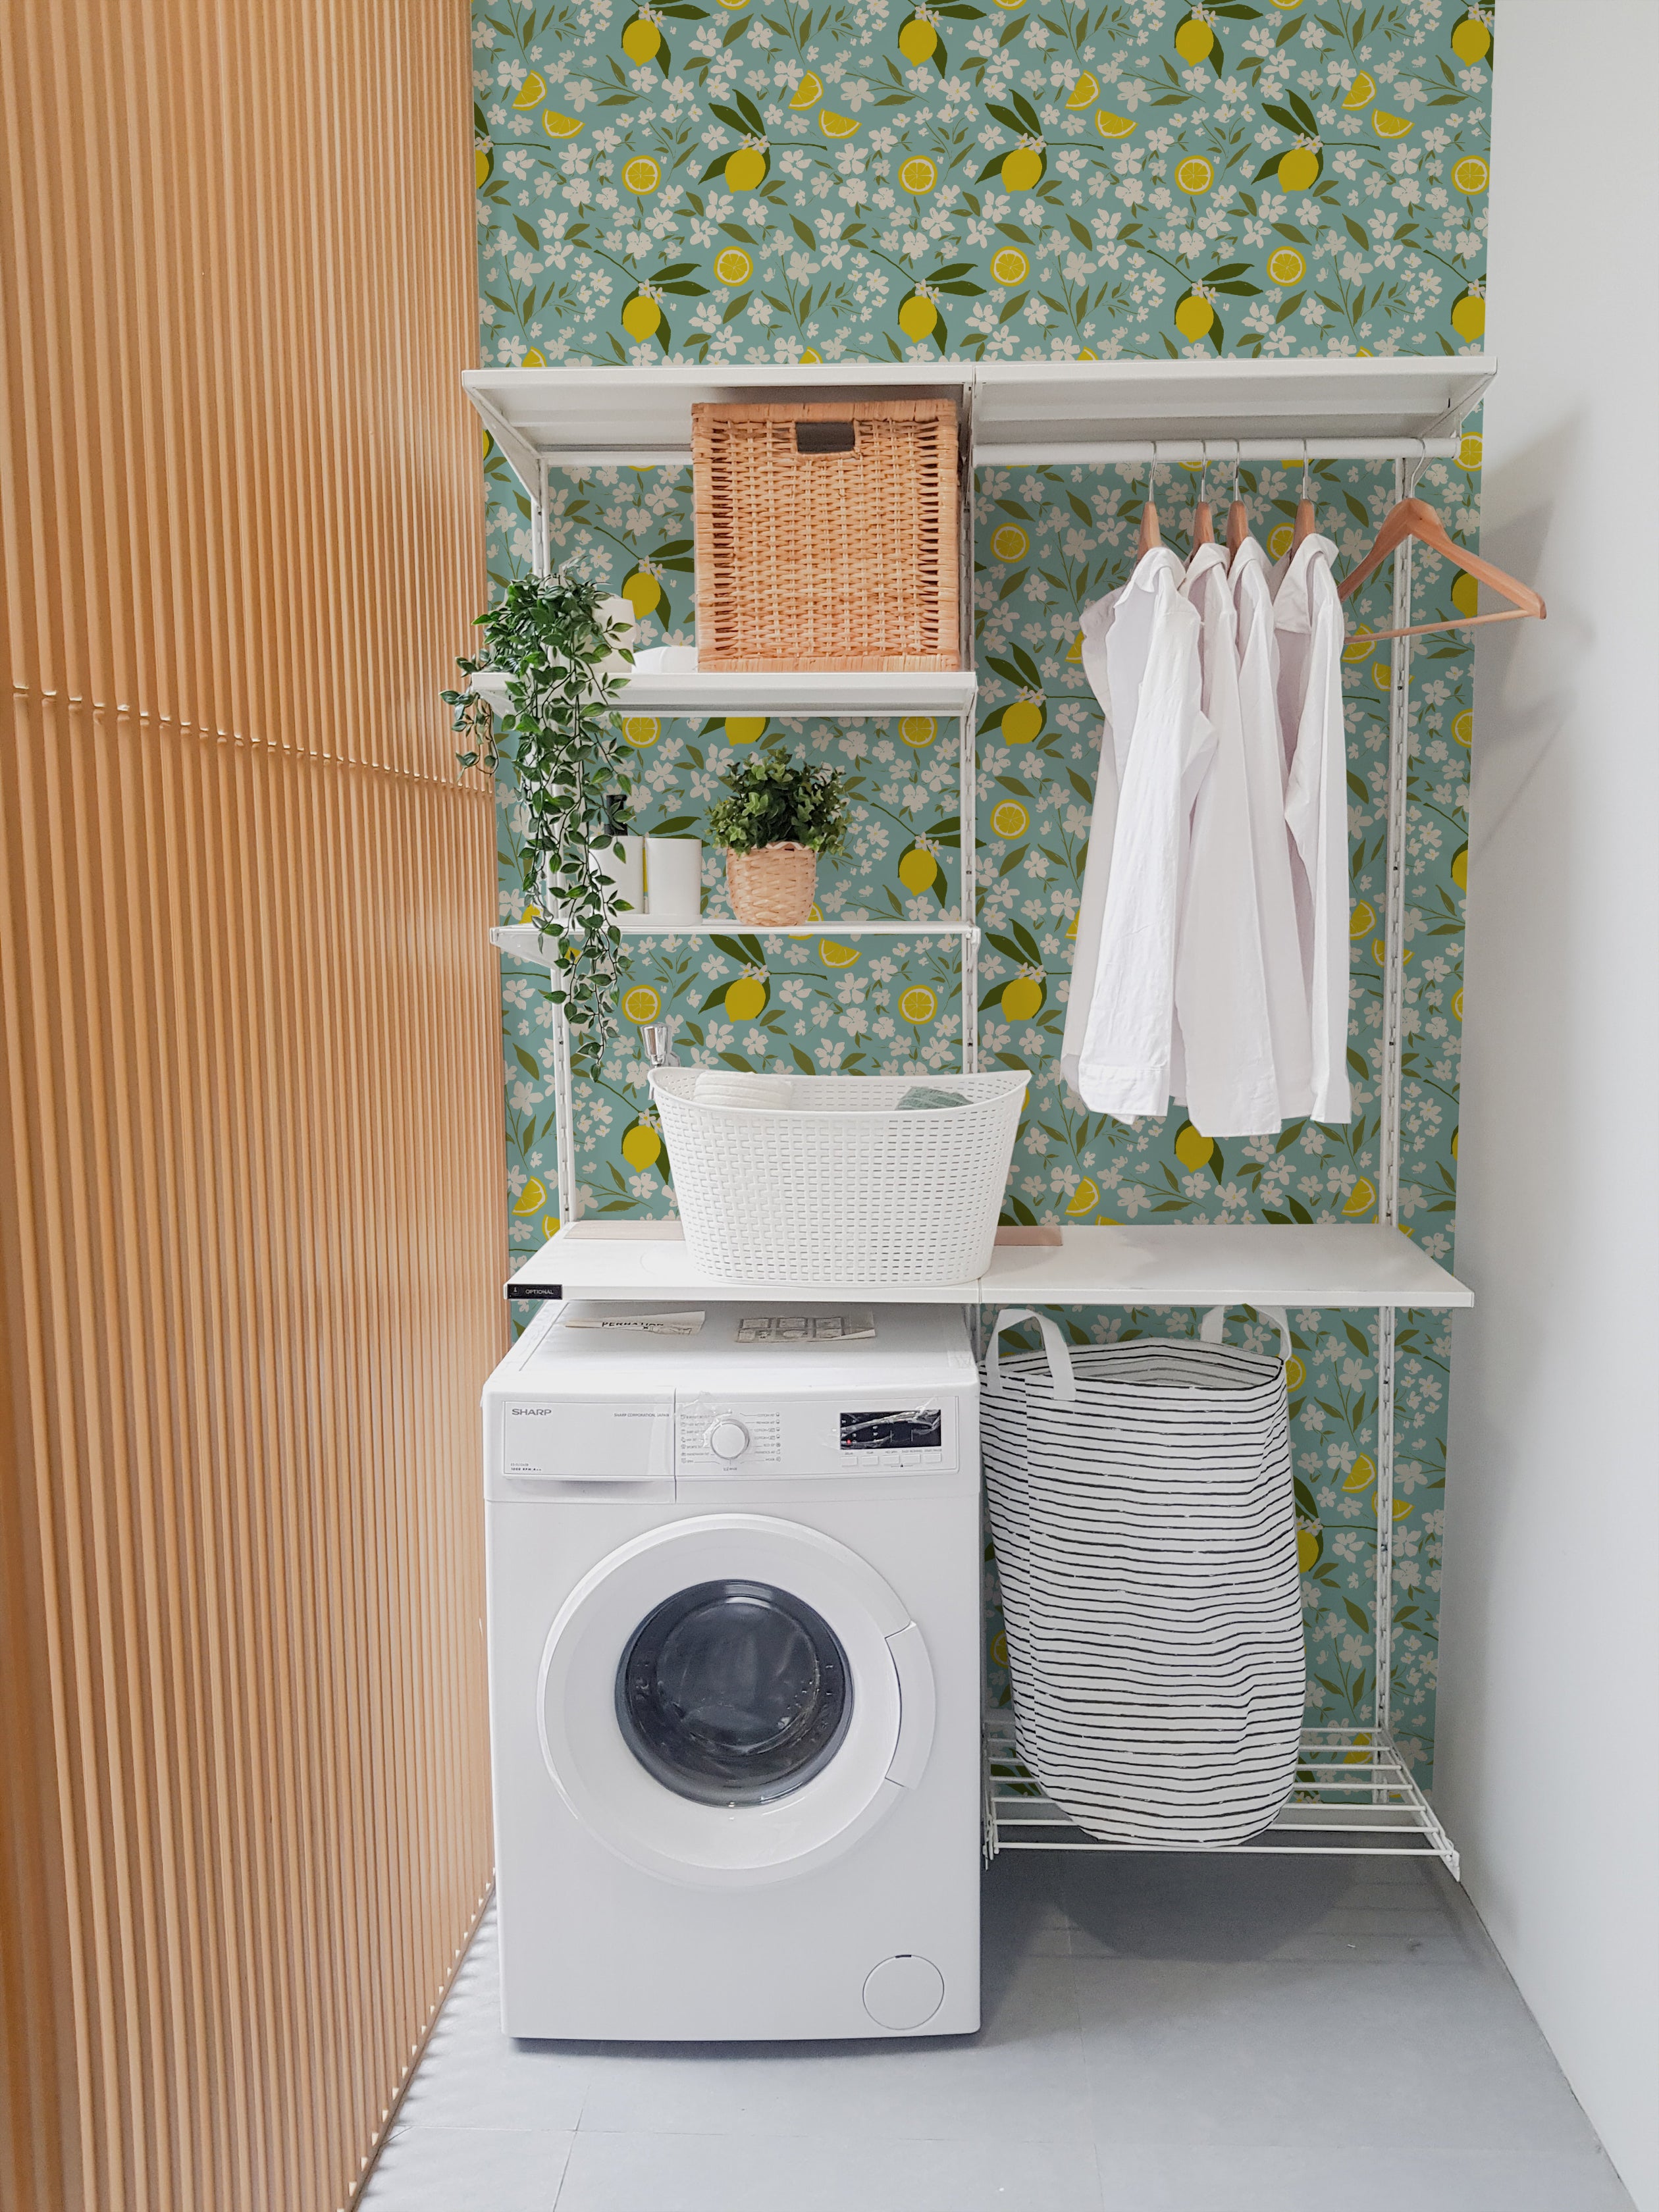 A laundry area enhanced by the Lemon + Jasmine Wallpaper, showcasing a lively pattern of yellow lemons and white jasmine flowers on a light blue background. The room includes white shelving with various laundry essentials and a washing machine, exuding a clean and cheerful vibe.